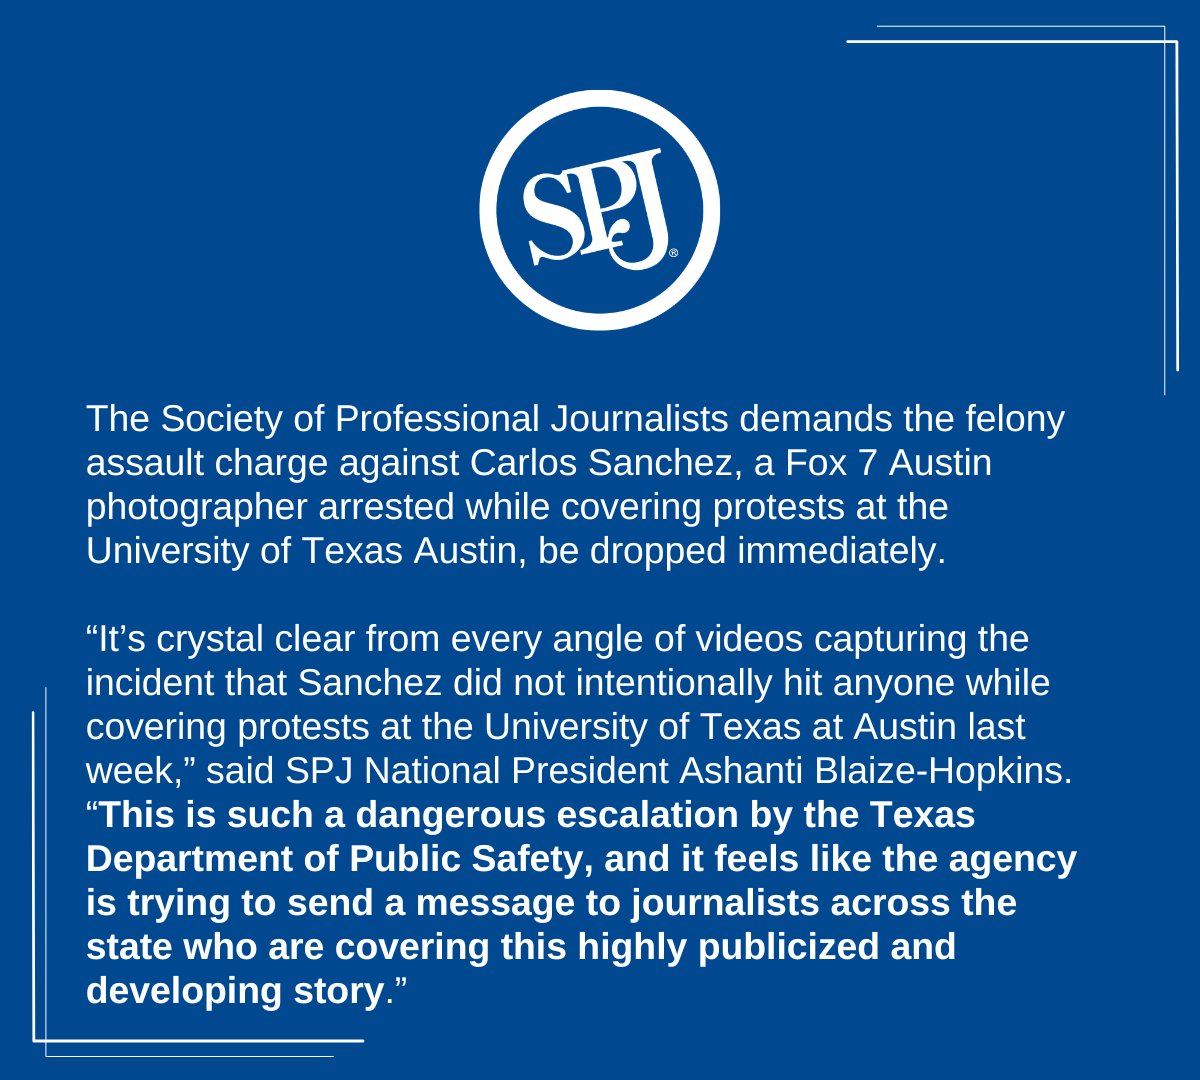 SPJ demands the felony assault charge against @fox7austin photojournalist to be dropped. 'It feels like [@TxDPS] is trying to send a message to journalists covering this highly publicized and developing story,' said SPJ President @AshantiBlaize. bit.ly/44kEXxP